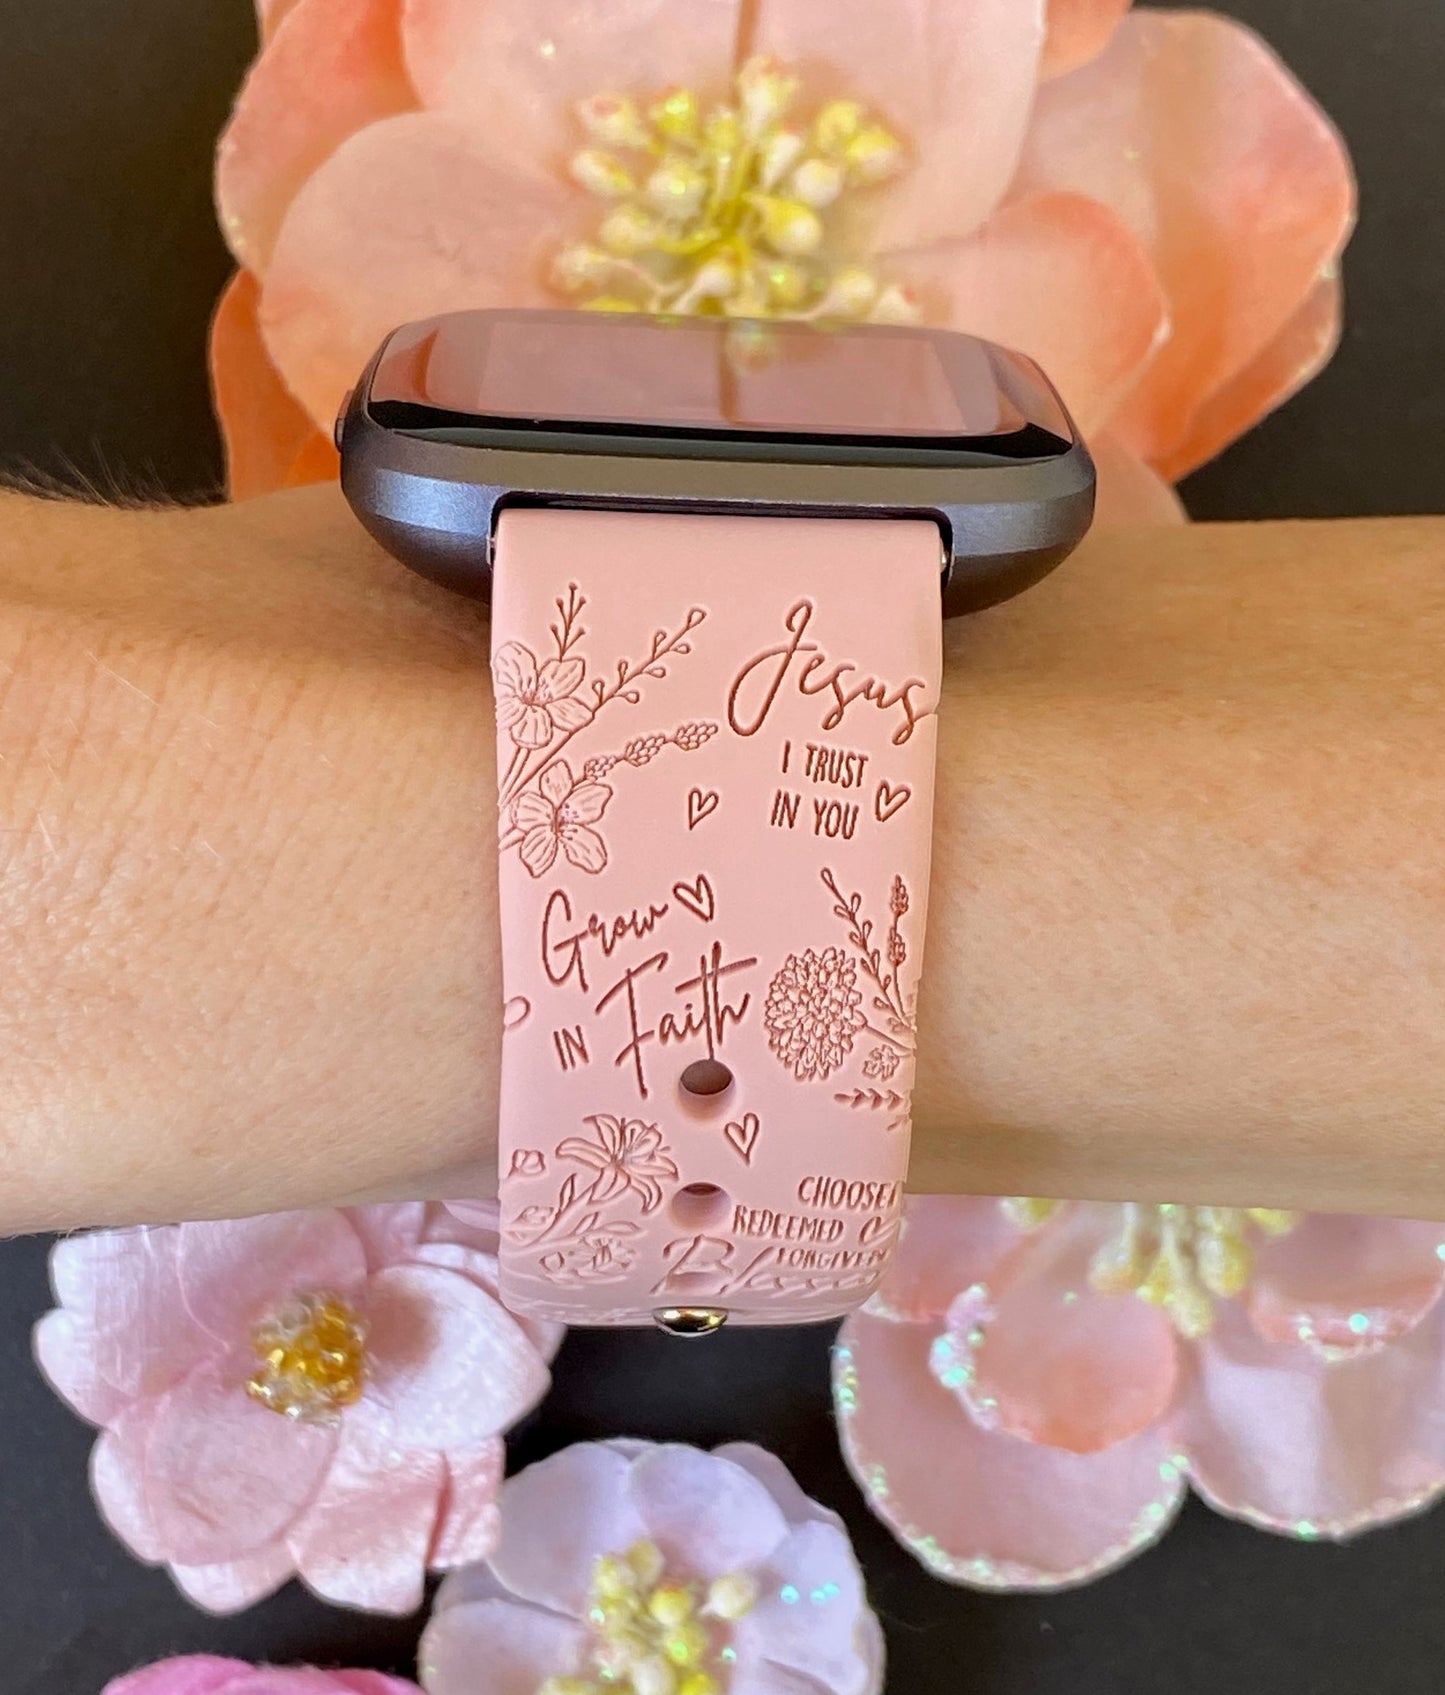 Faith Floral Fitbit Versa 1/2 Watch Band